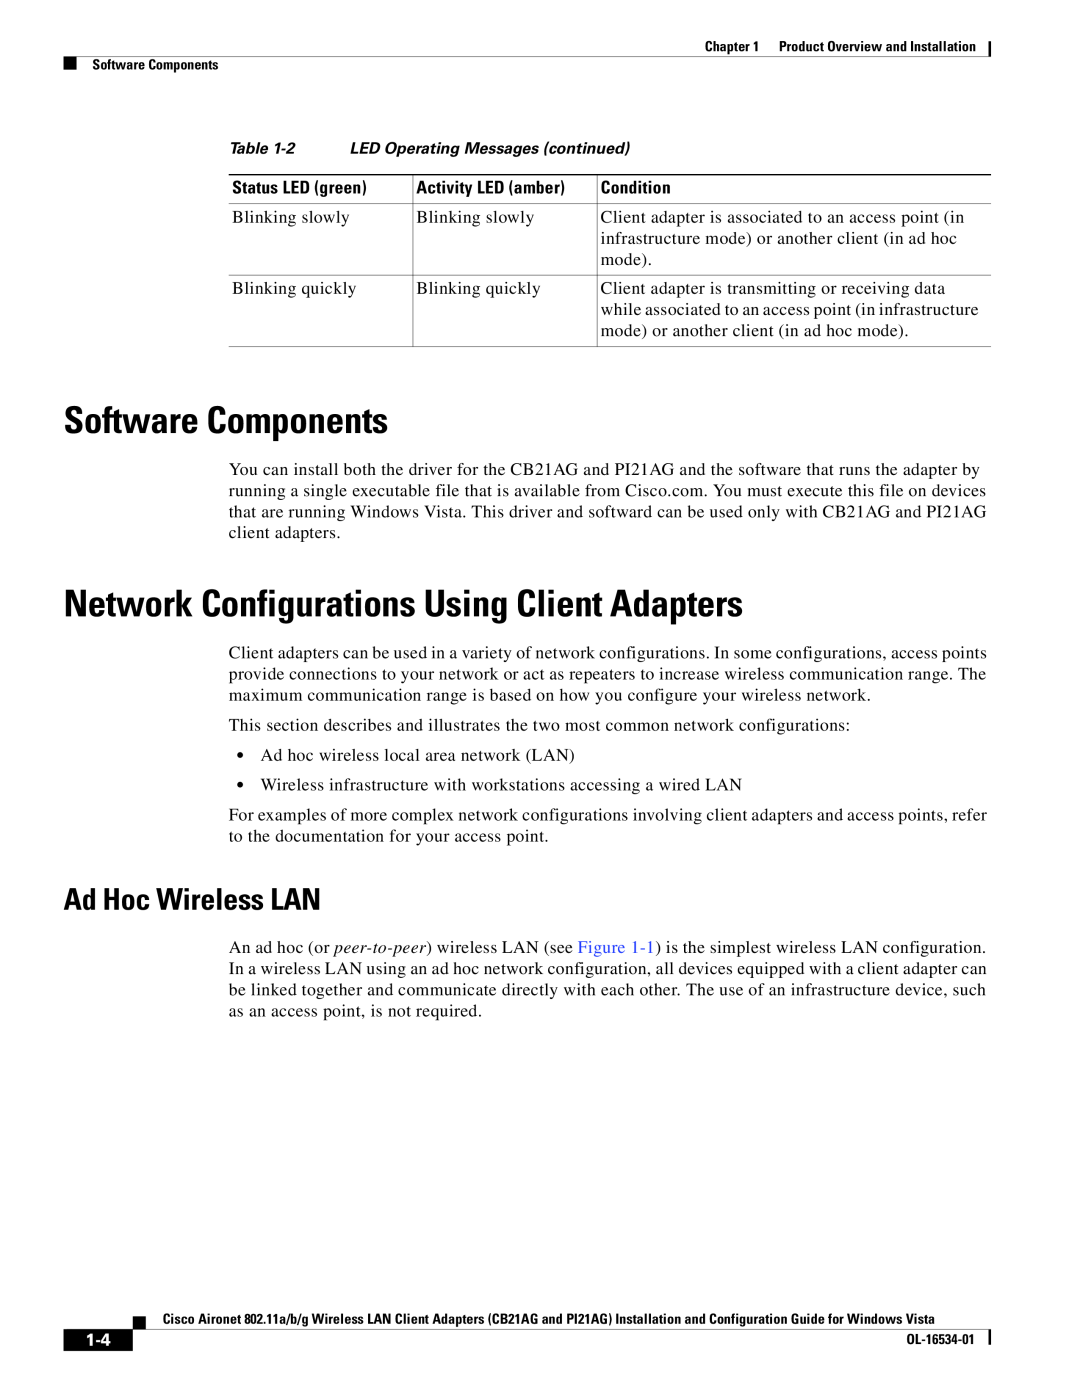 Cisco Systems PI21AG Software Components, Network Configurations Using Client Adapters, Ad Hoc Wireless LAN, Condition 